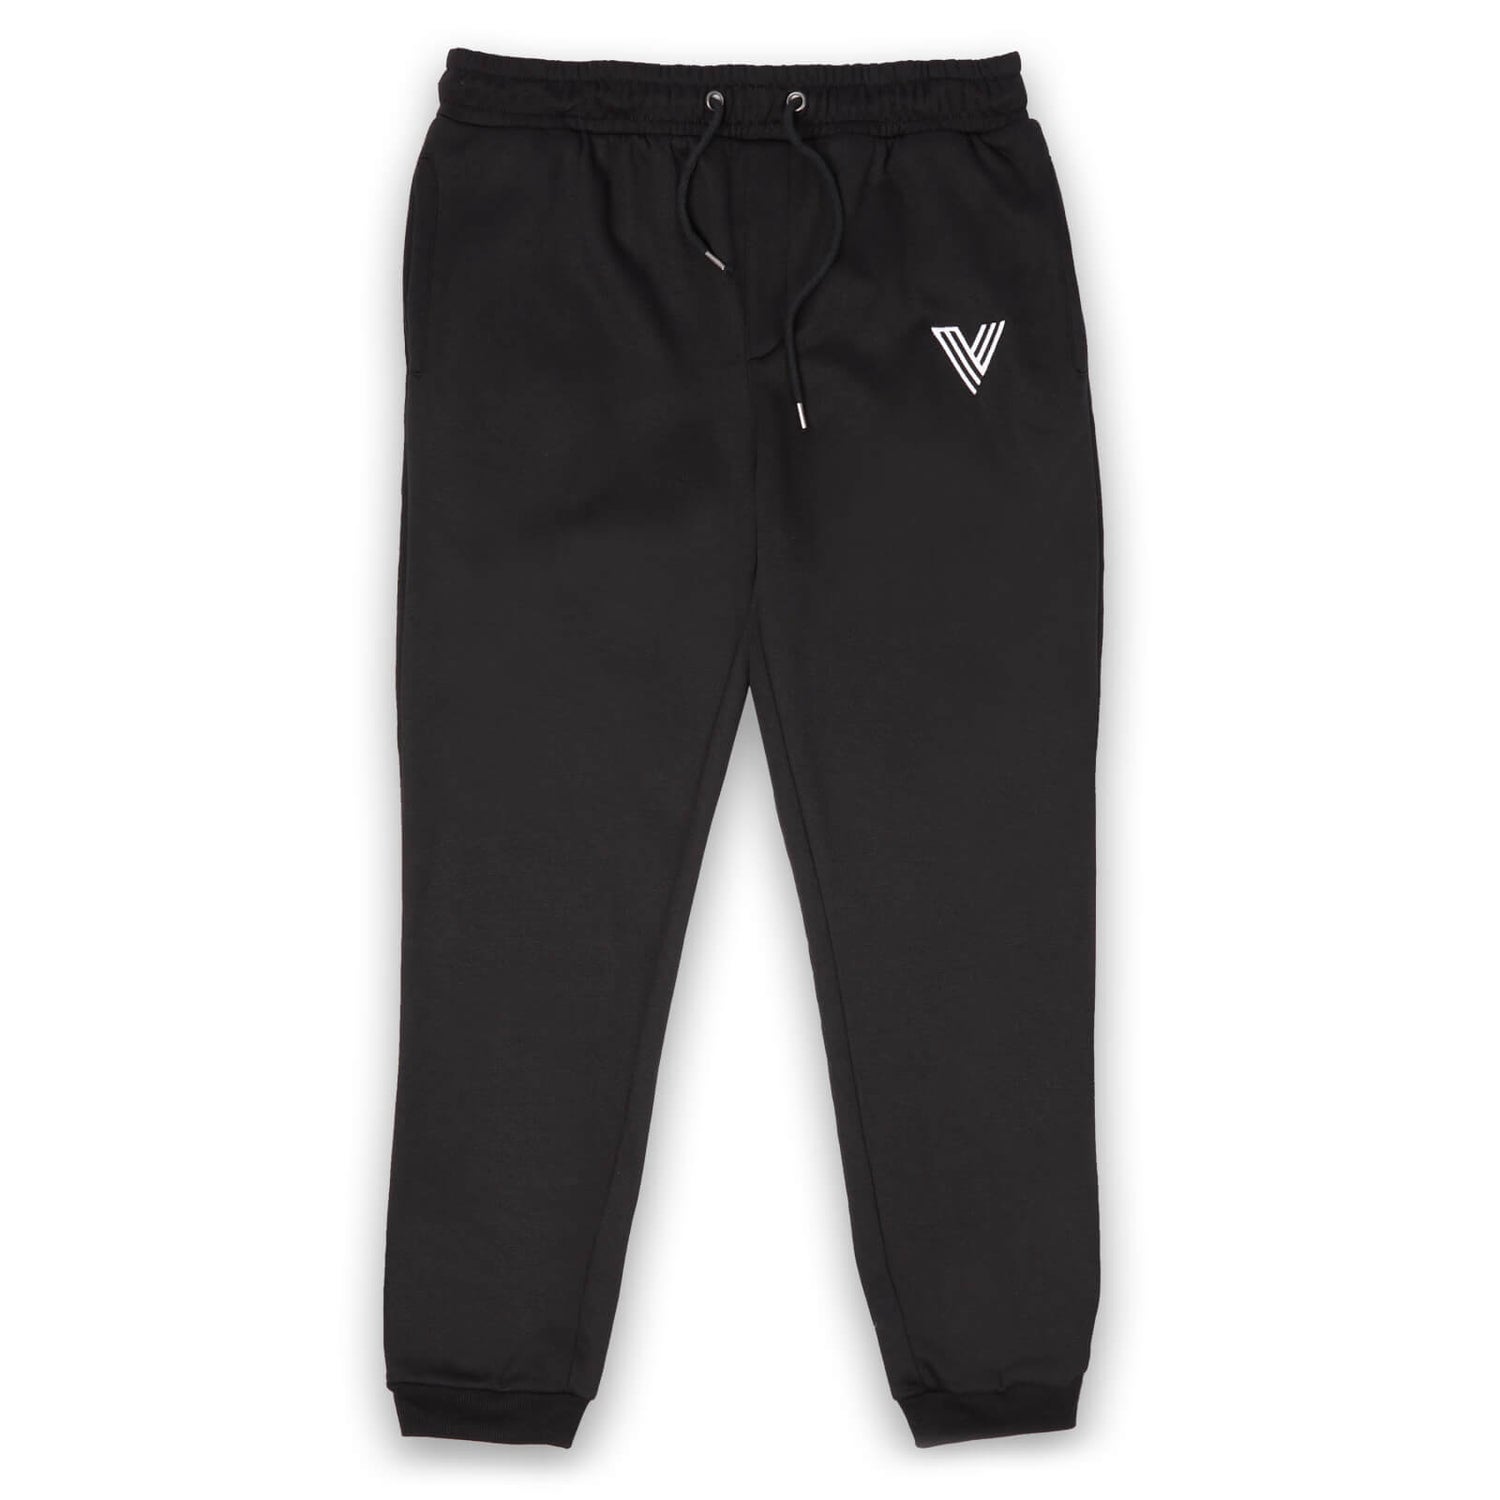 Call Of Duty V Embroidered Jogging Unisexe - Noir